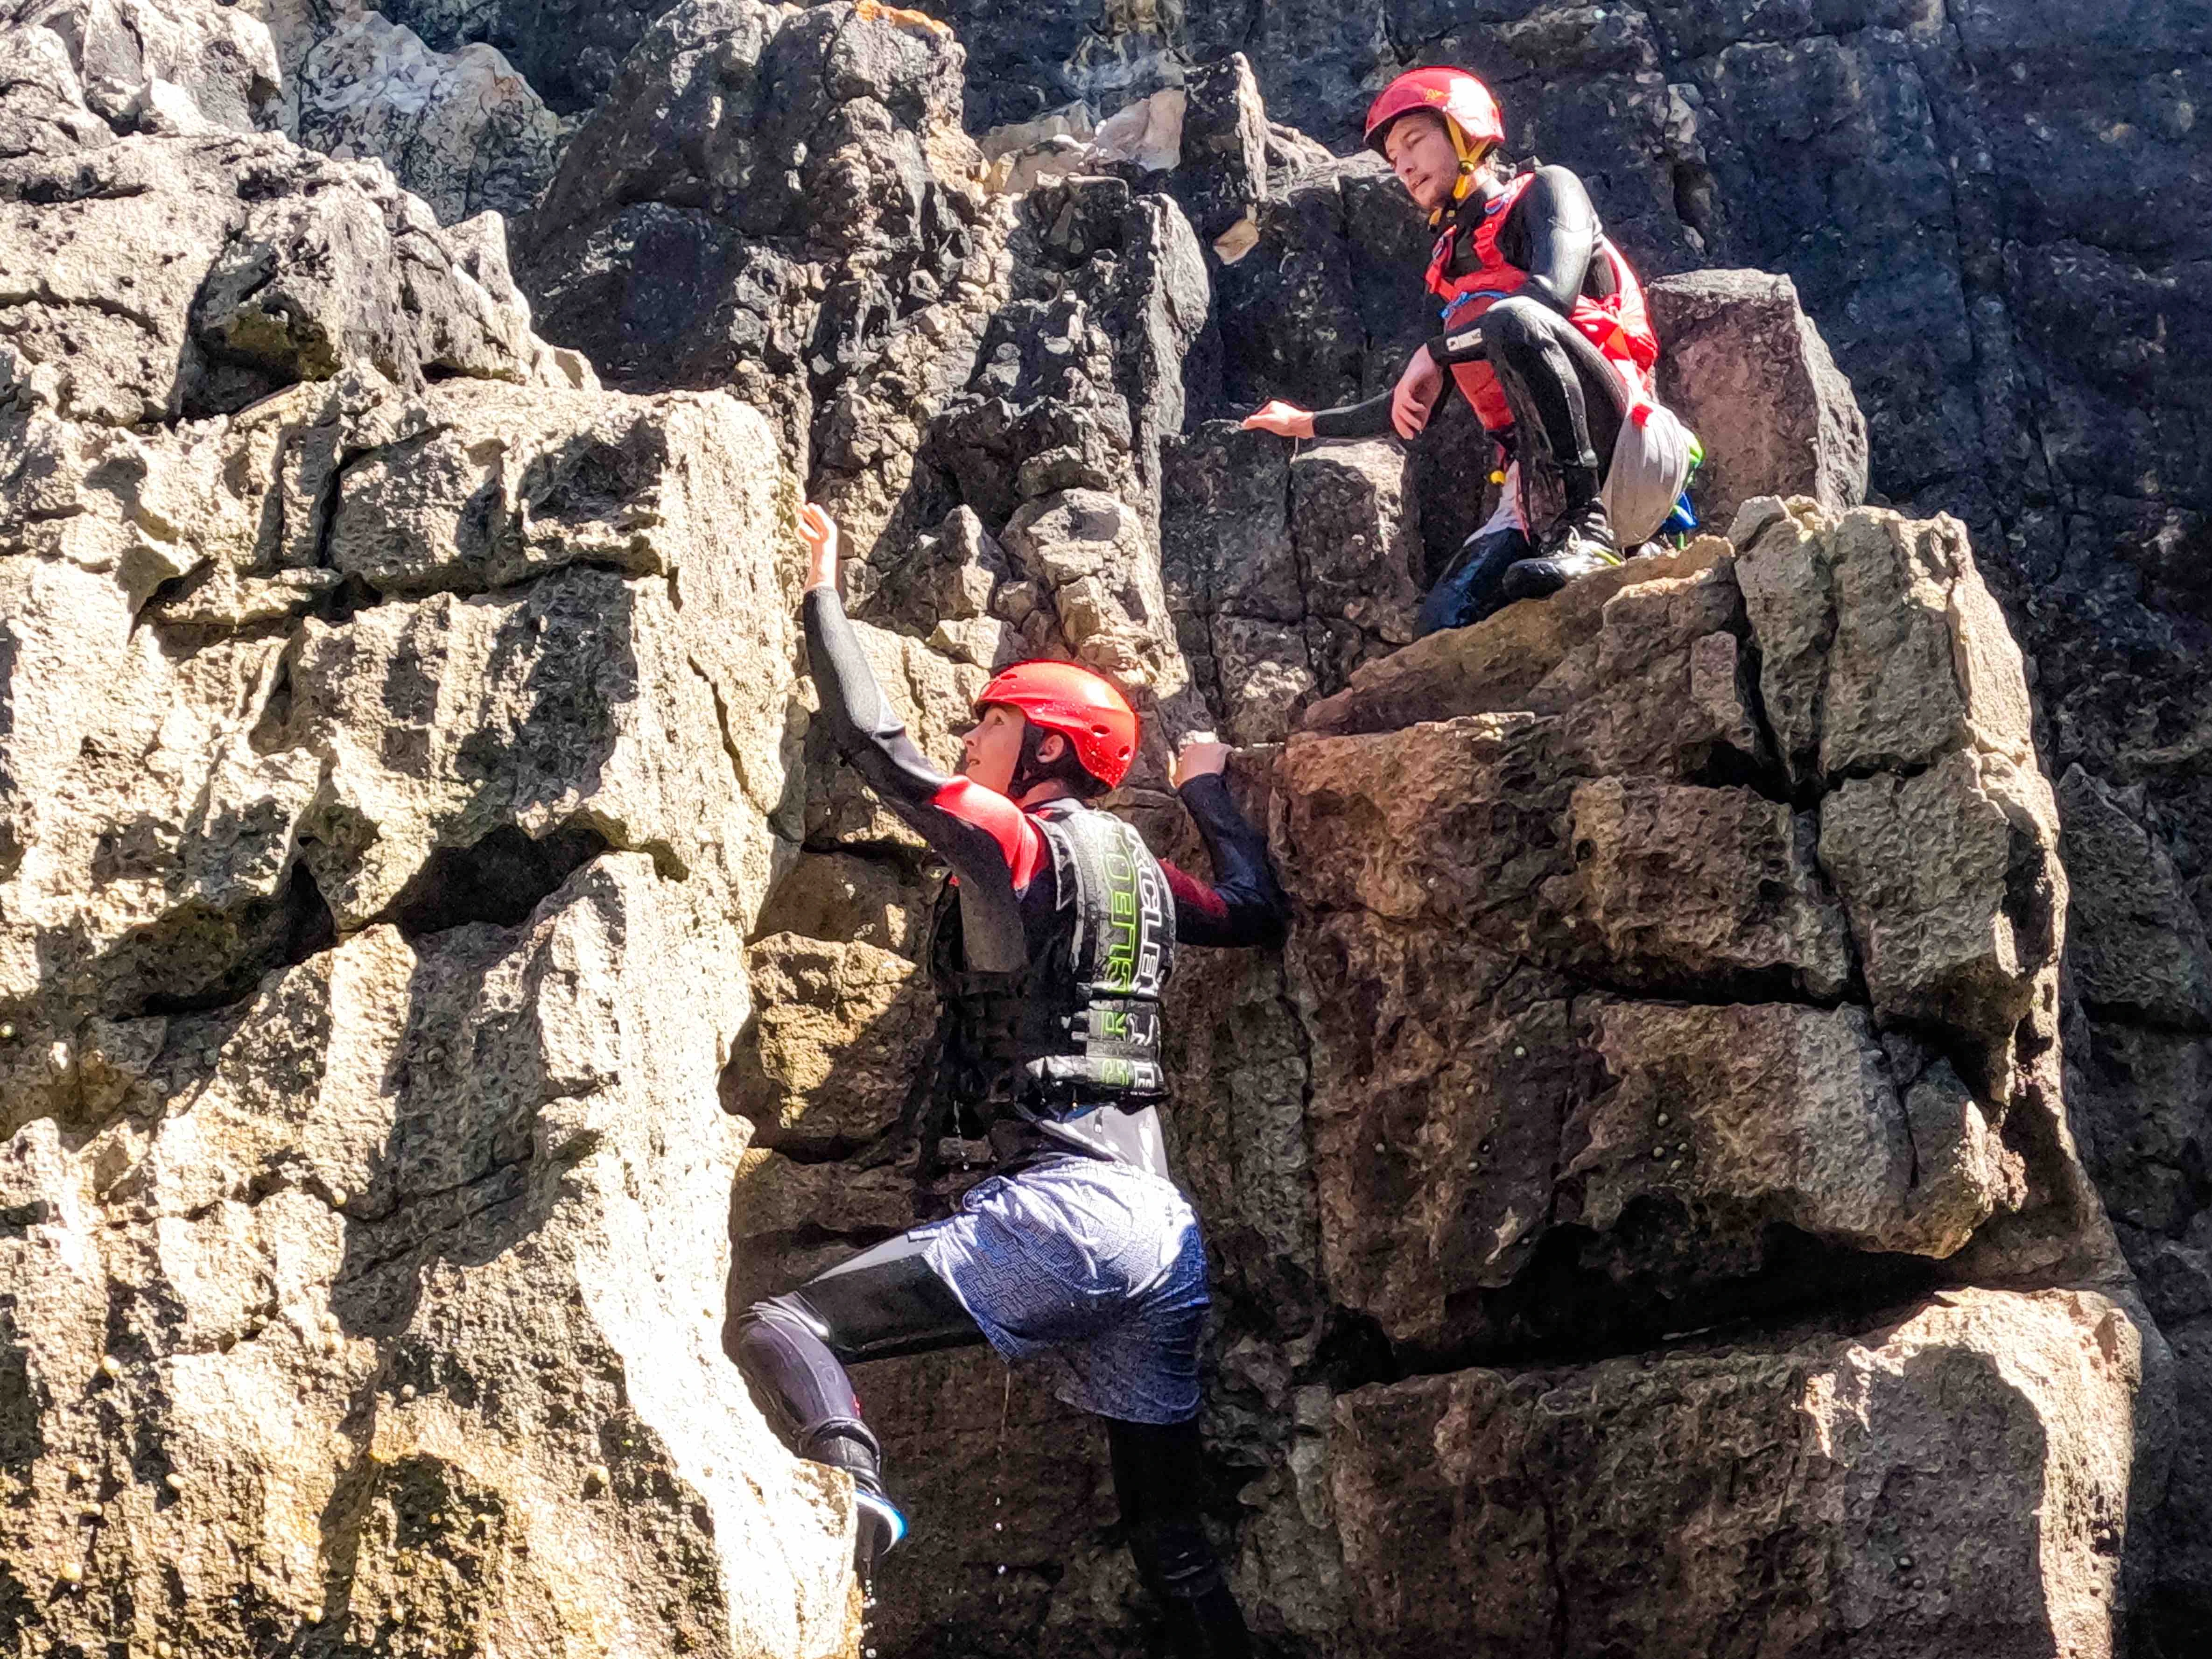 An instructor from Pembrokeshire Coastal Adventure is guiding a client to climb rocks.